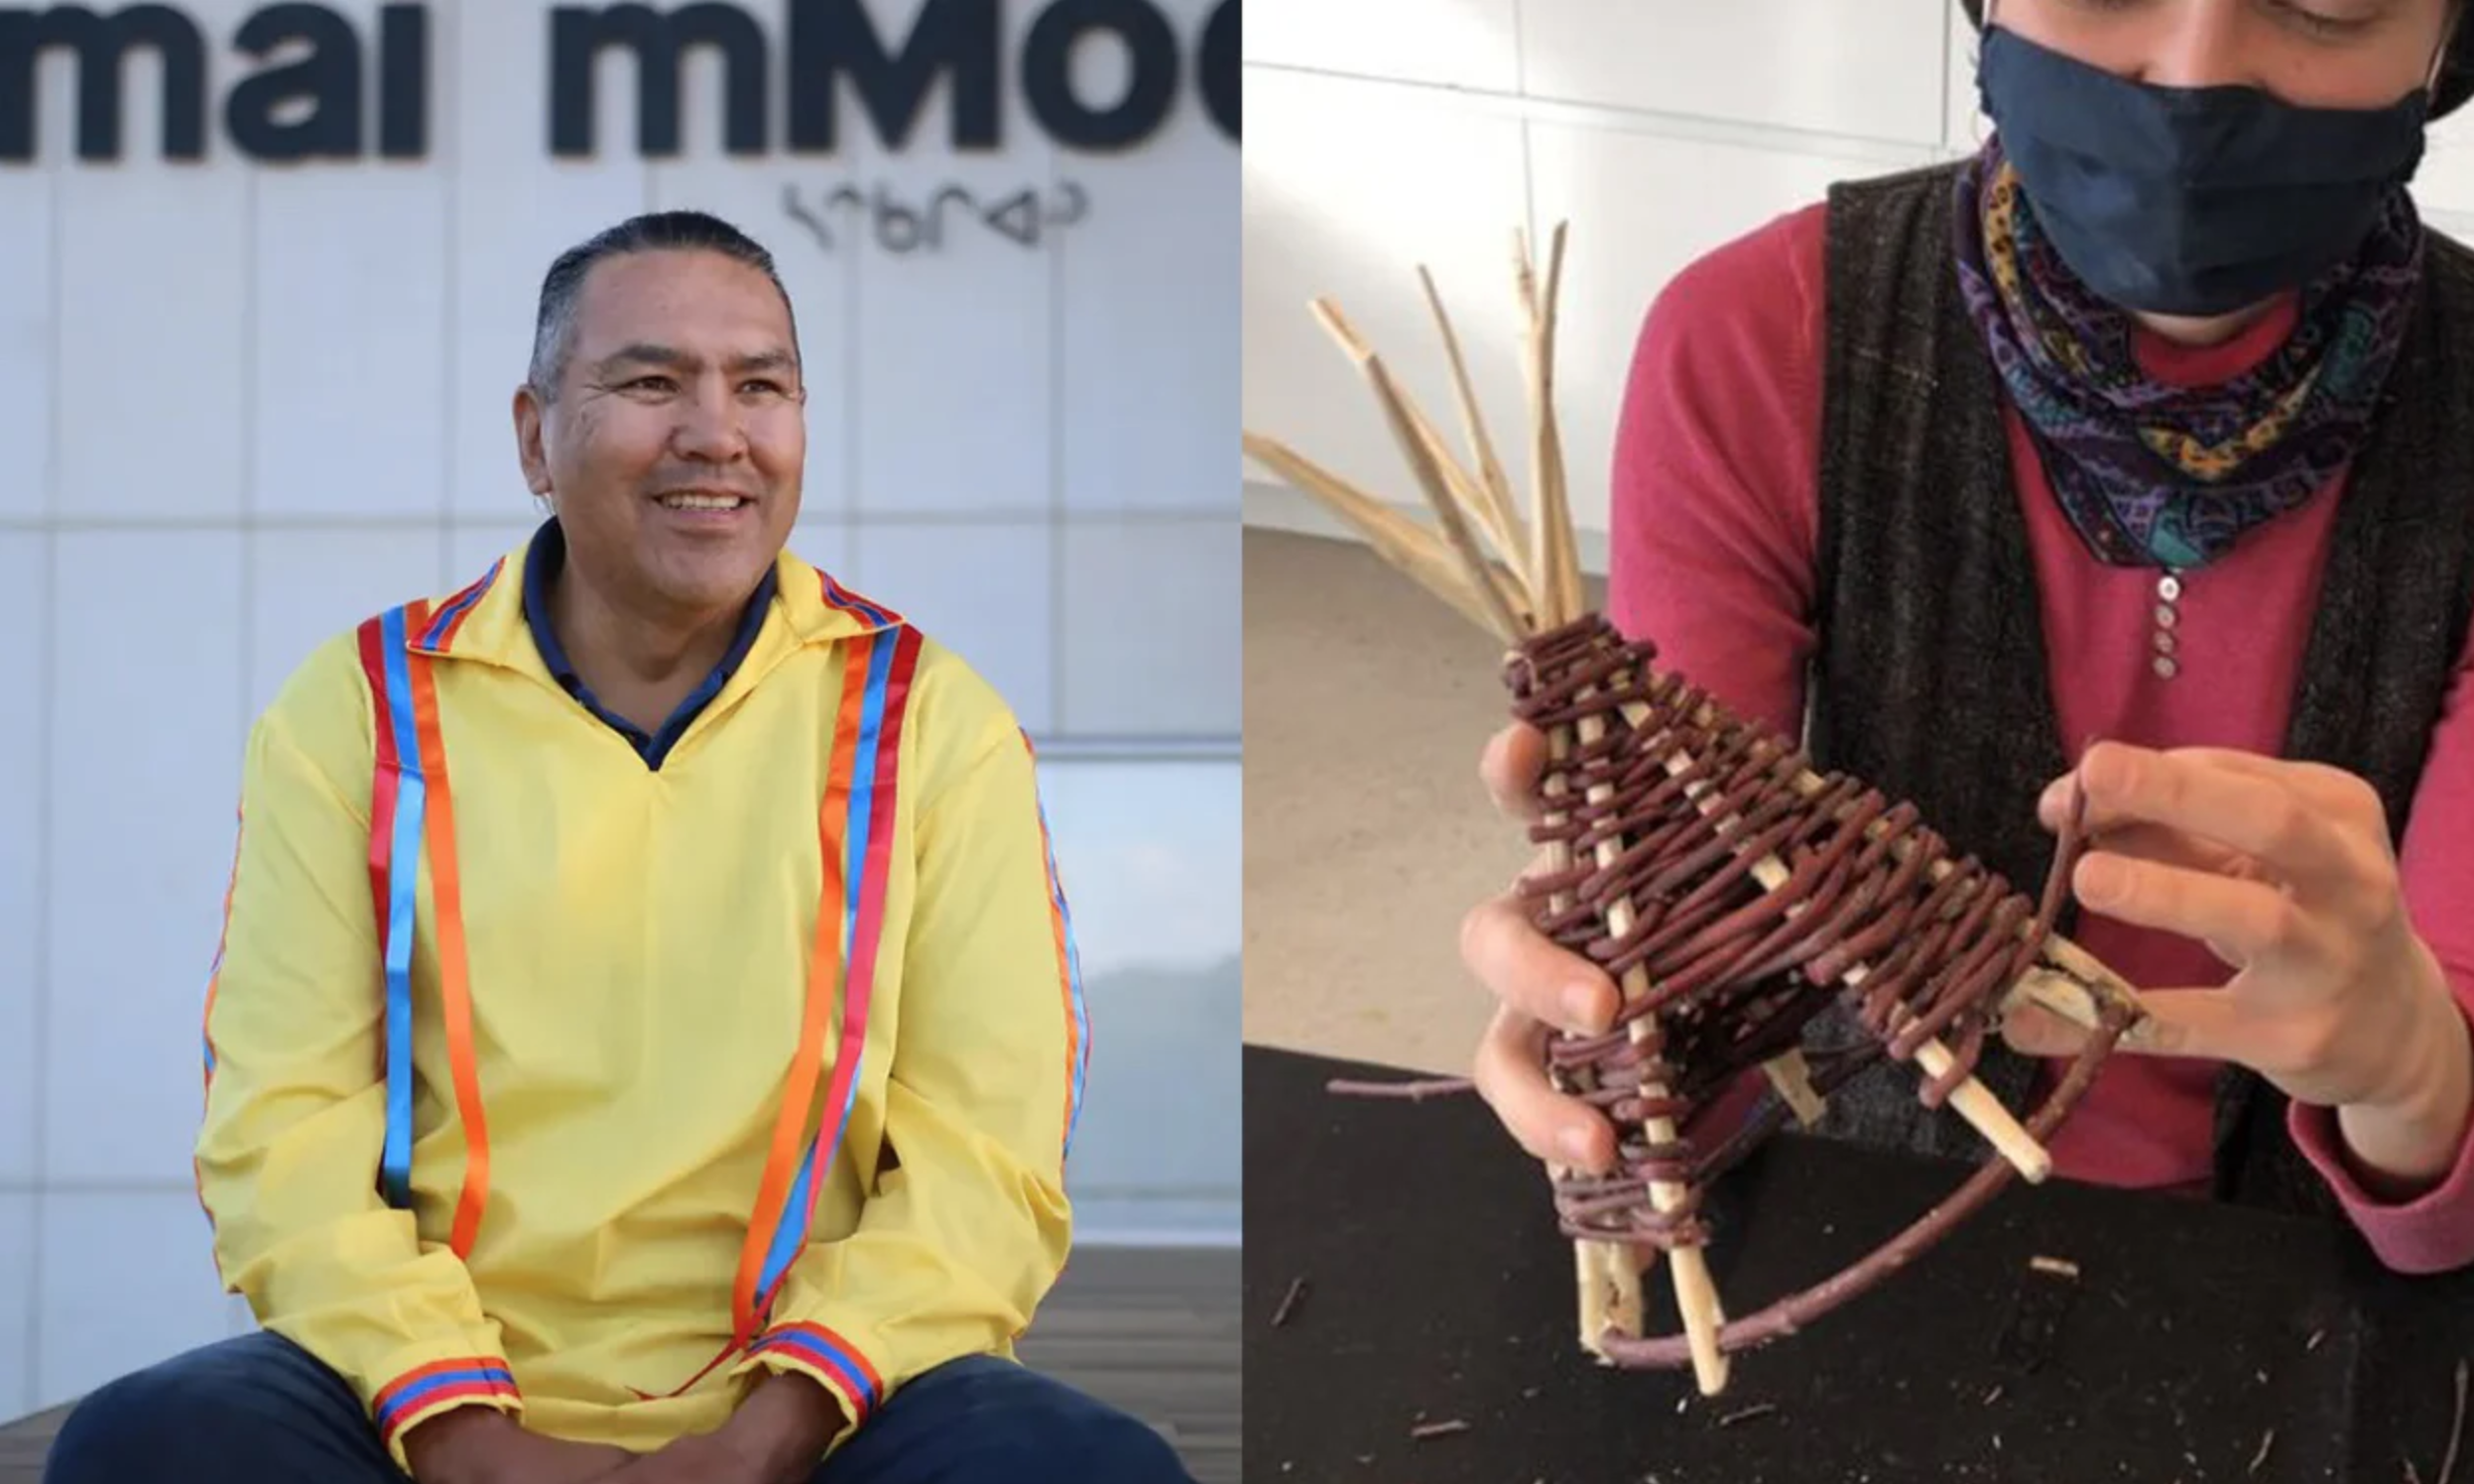 Left: Lyndon J Linklater. Right: A participant shows their red willow tipi.